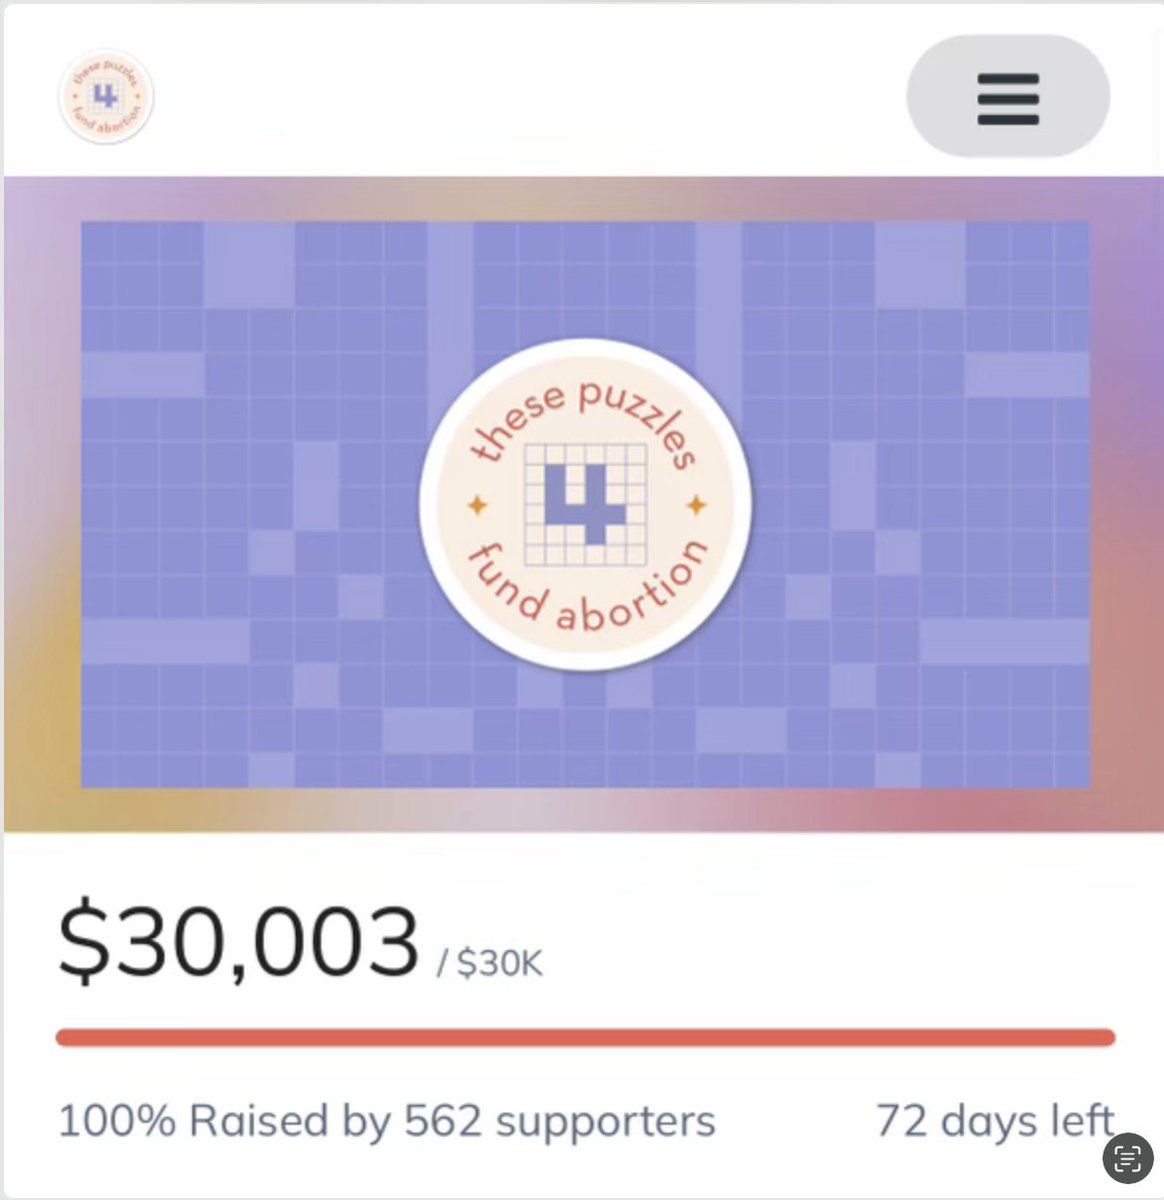 !!!!!!!!! Goal updated to $40,000 (which would mean $8,000 each to @BaltimoreFund, @ChiAbortionFund, @IWRising, @tbafund, and @FondoMARIAmx_!!!) Thank you to everyone who contributed and helped spread the word about These Puzzles Fund Abortion! fund.nnaf.org/tpfa4